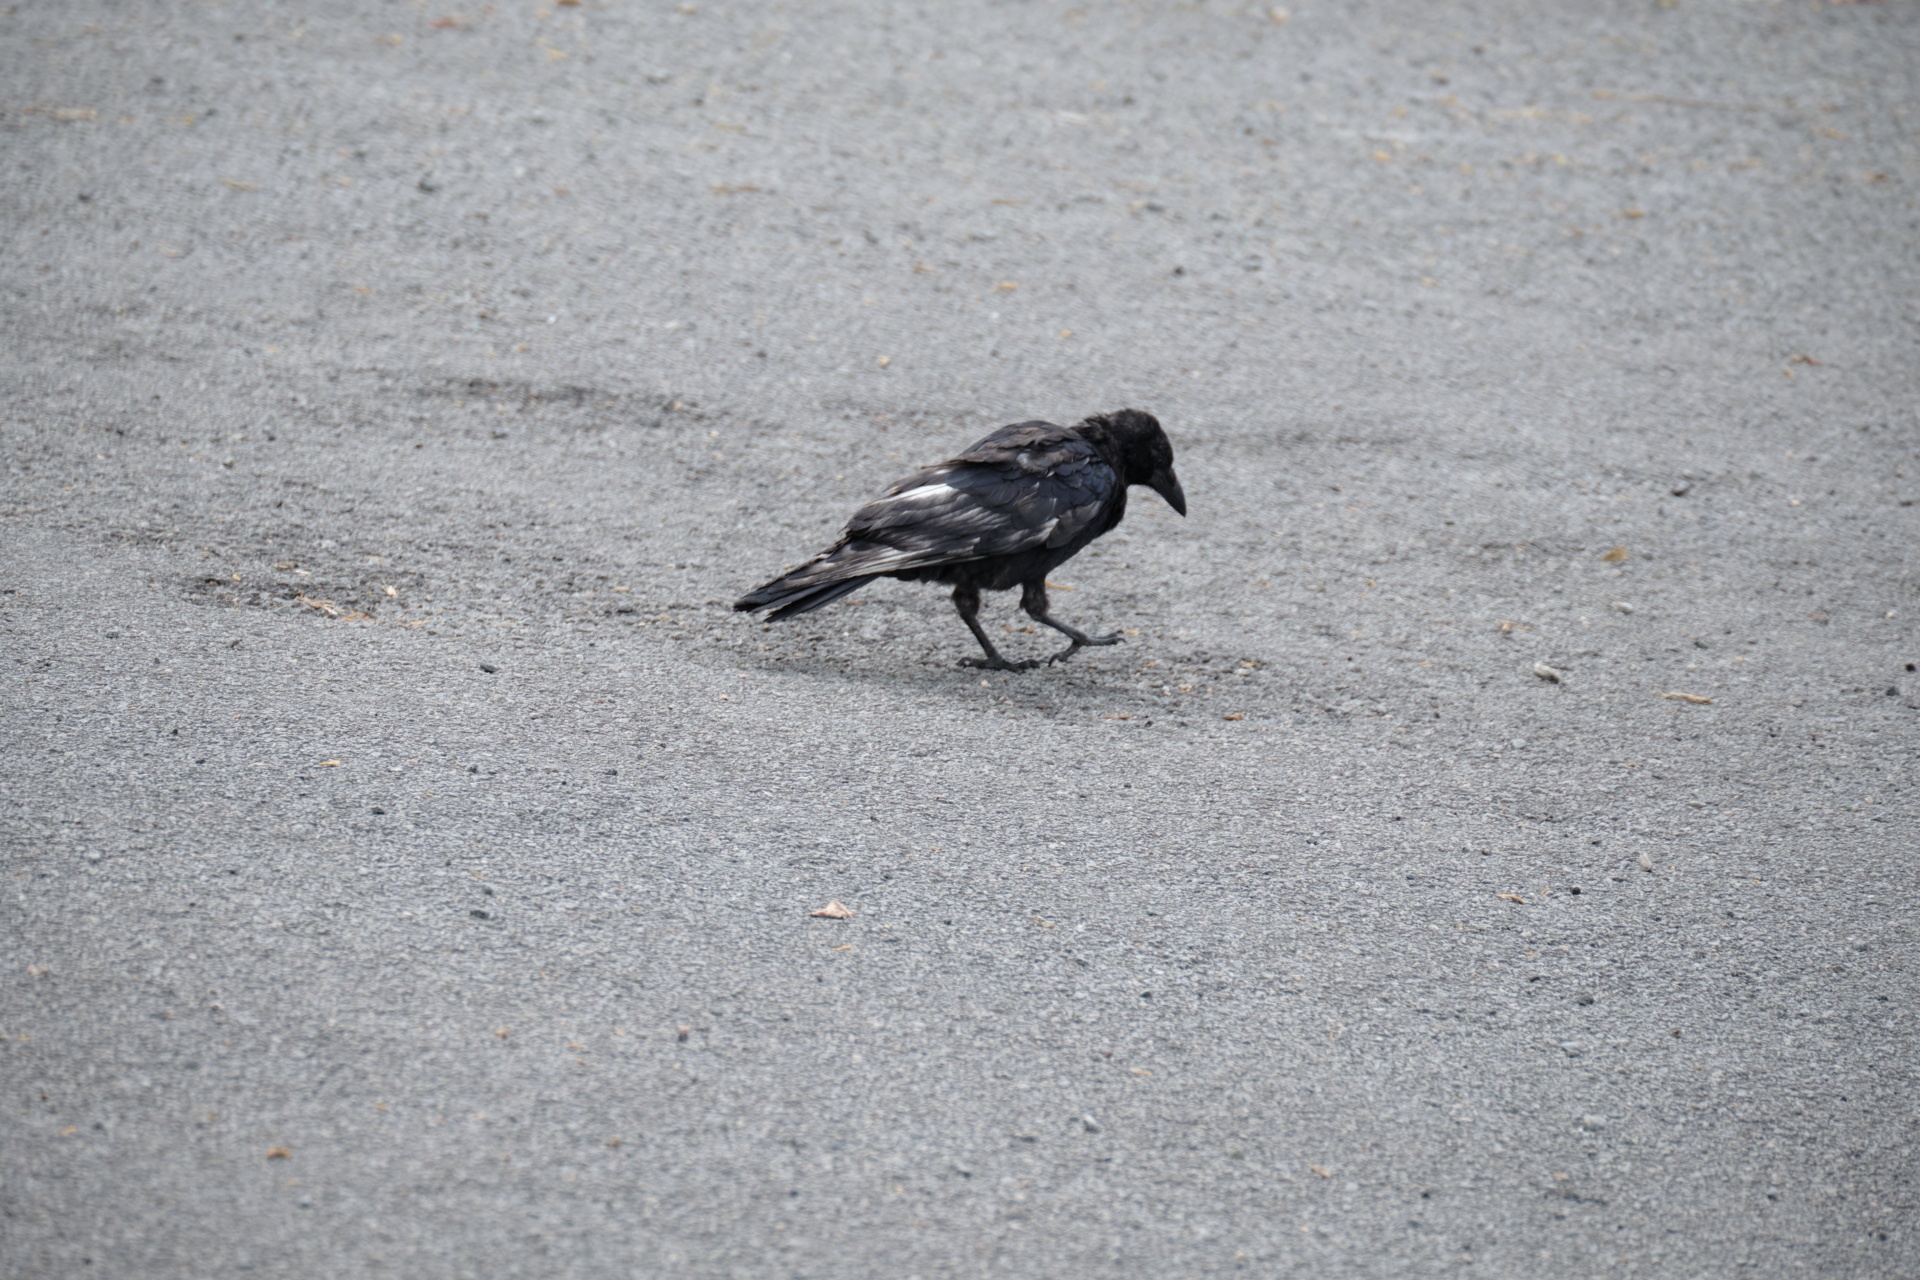 Raven pecking in the street